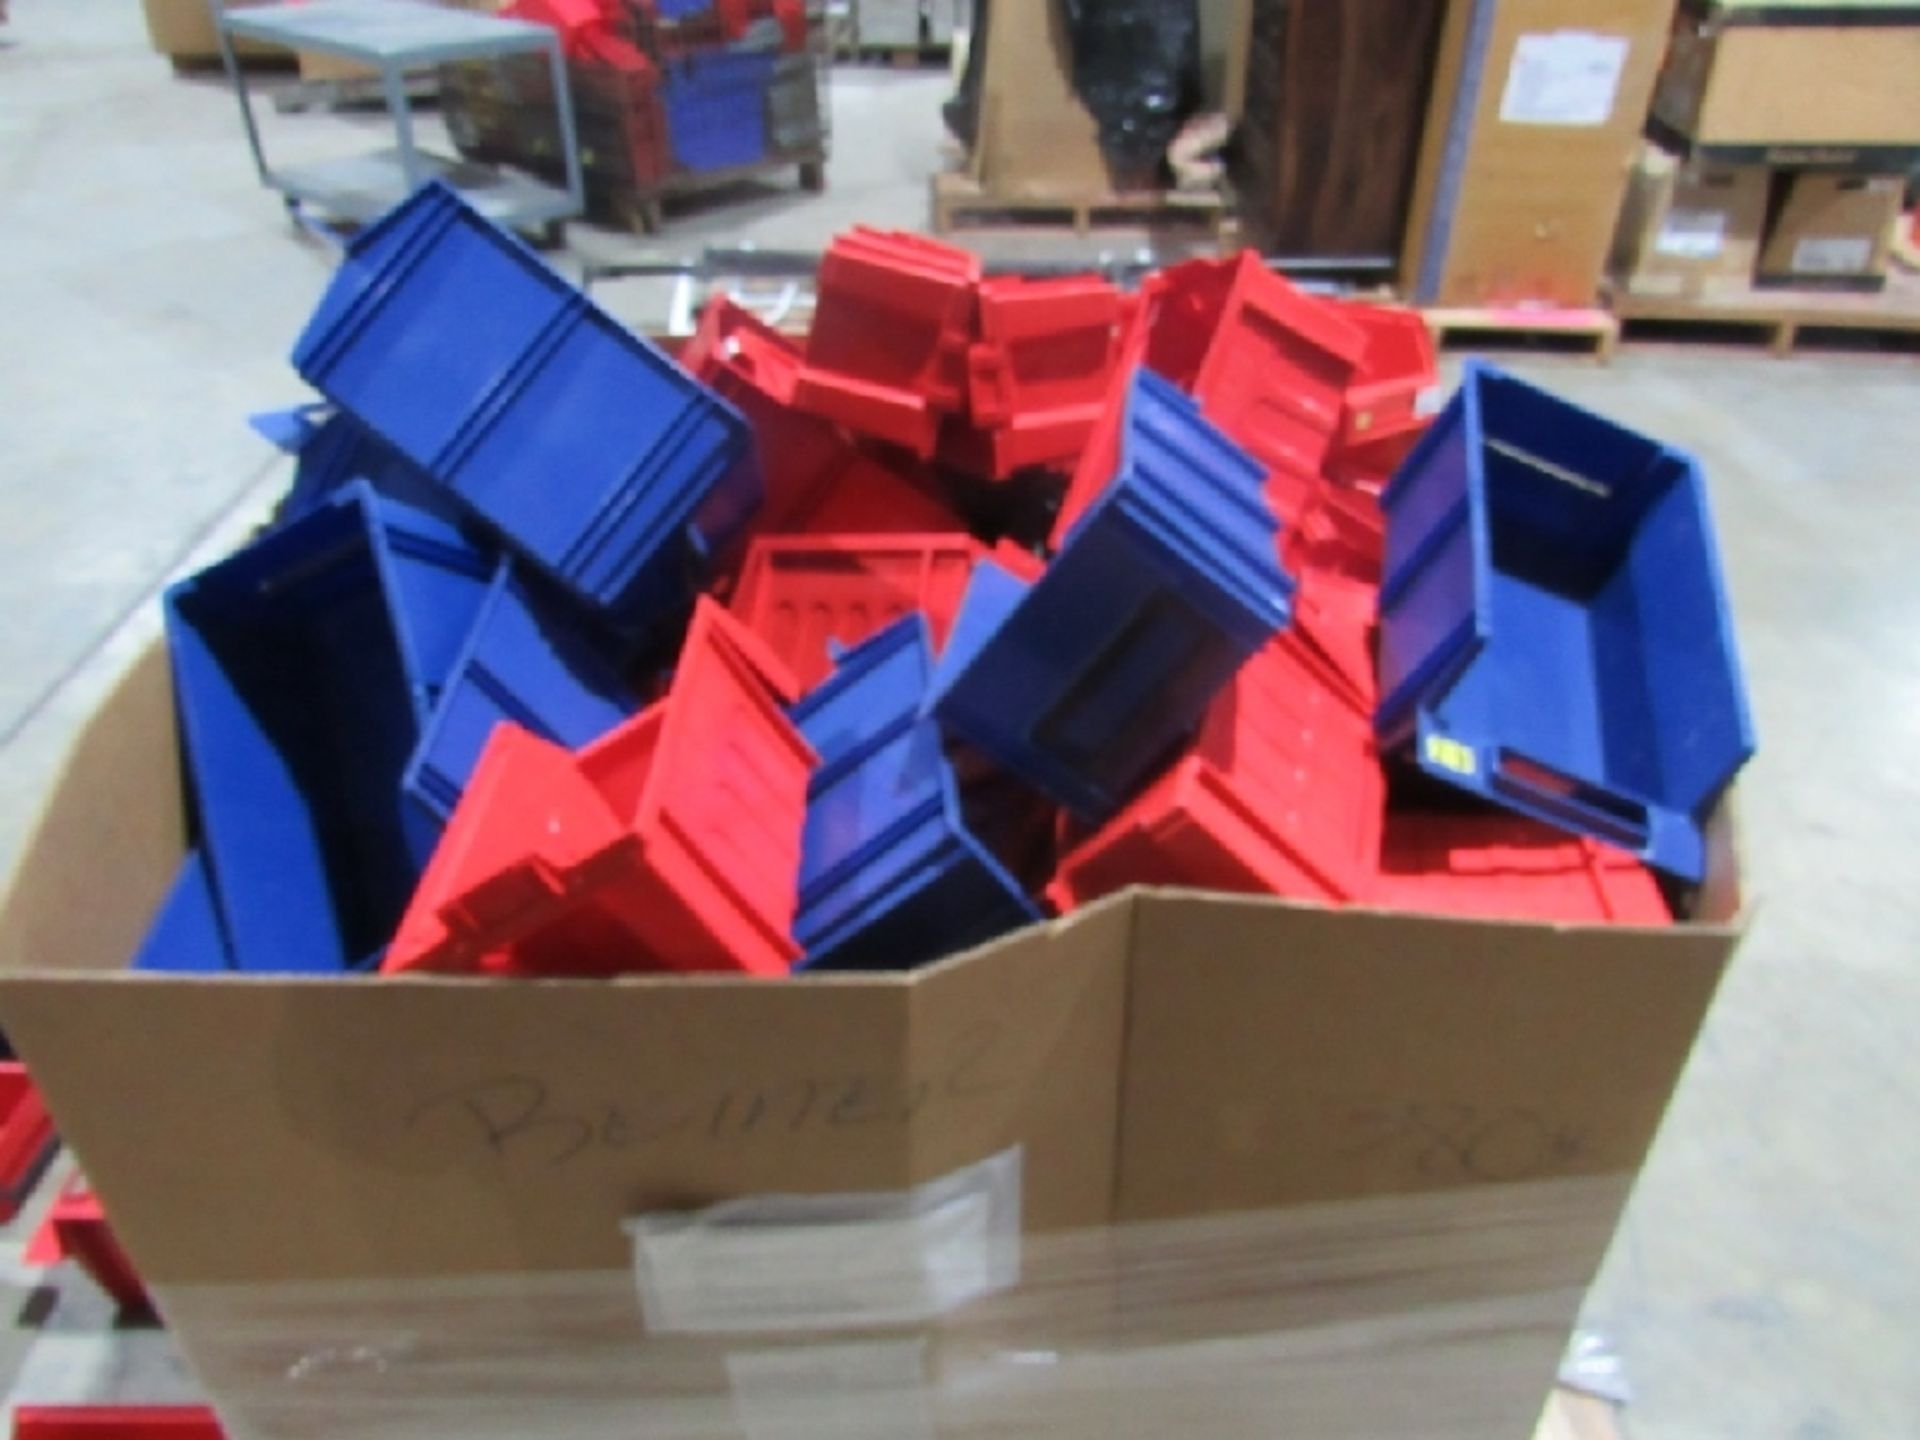 (approx qty - 45) Organizational Bins- ***Located in Chattanooga, TN*** MFR - Unknown Sizes Range - Image 4 of 6